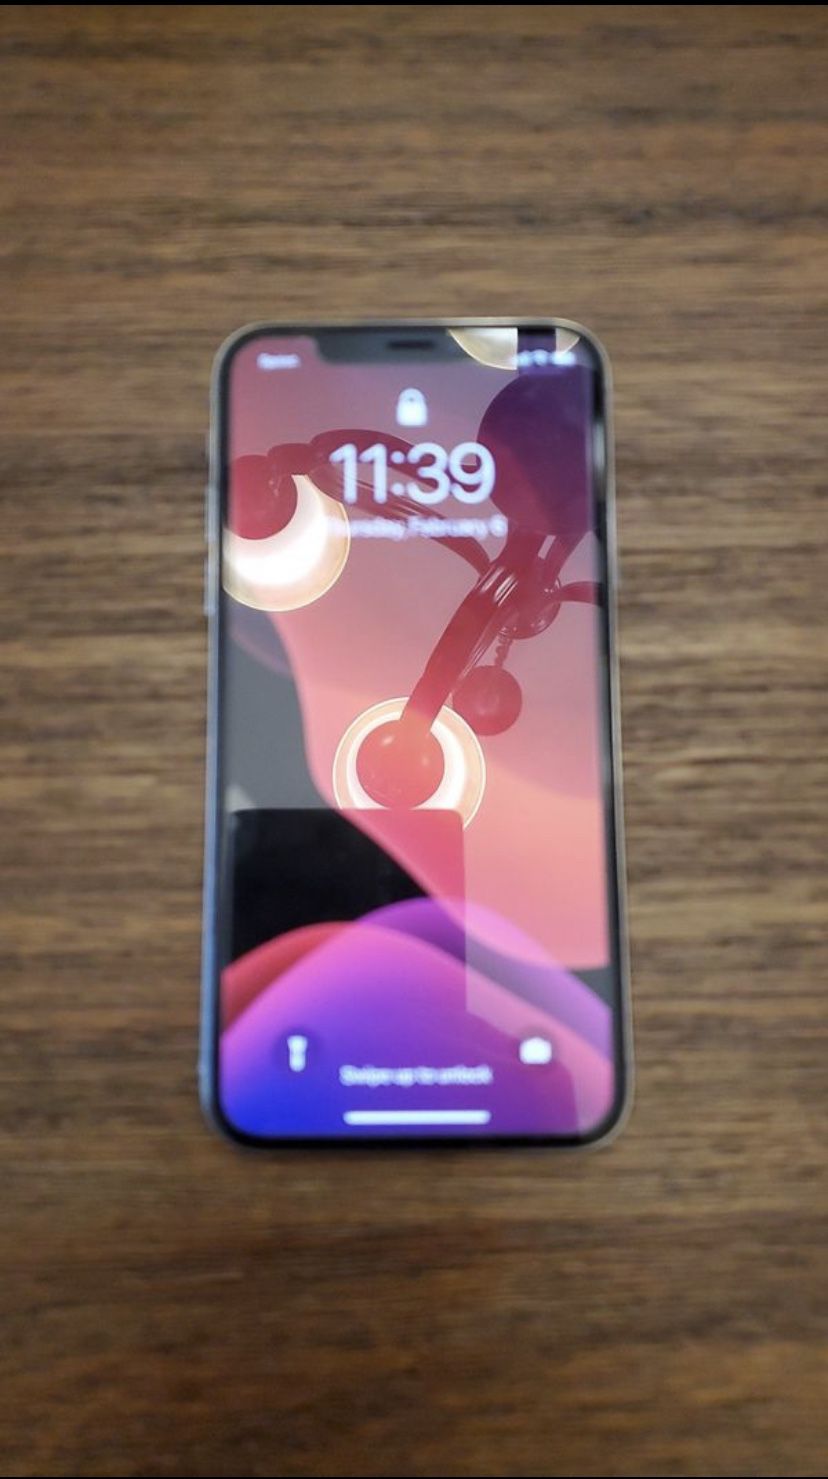 Sprint iPhone X 256GB with Mophie extended battery case